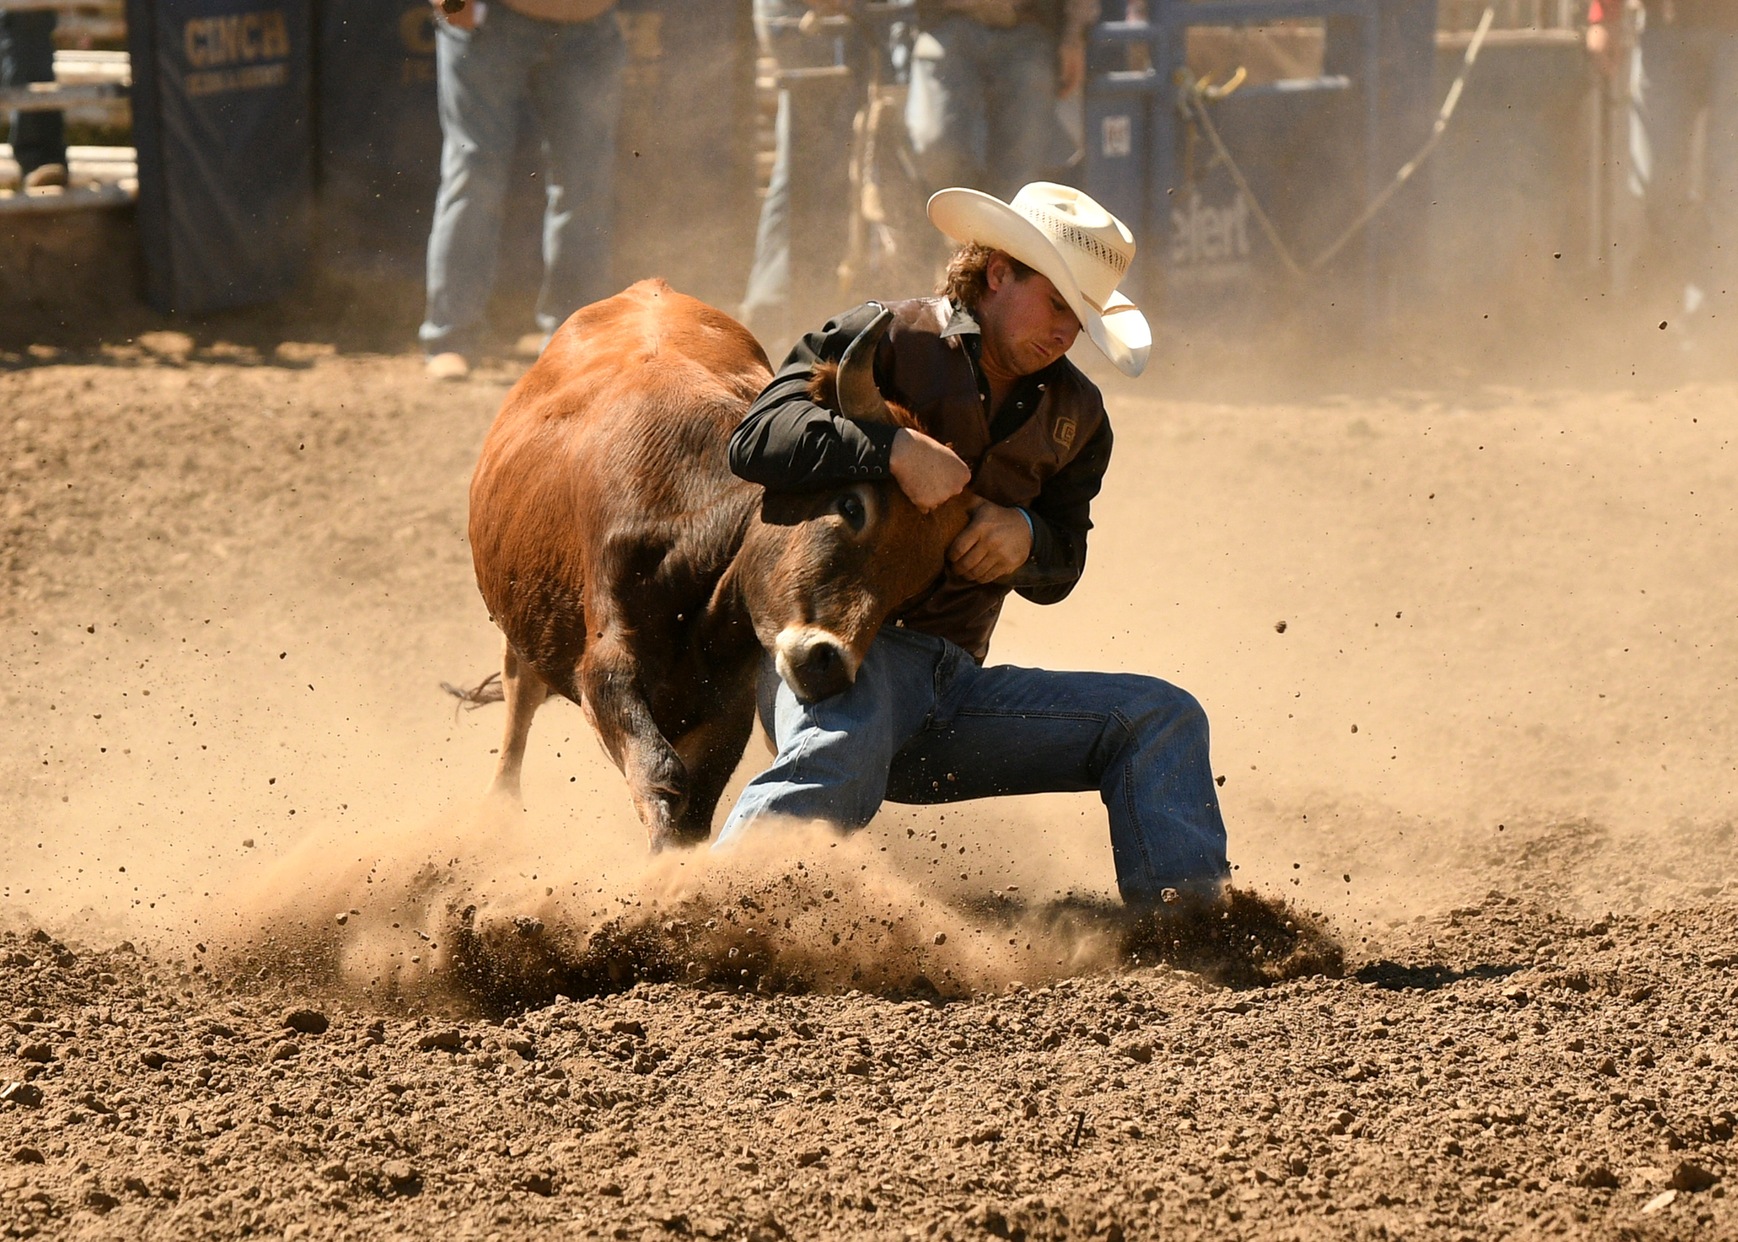 Broncbuster rodeo opens the season in Colby